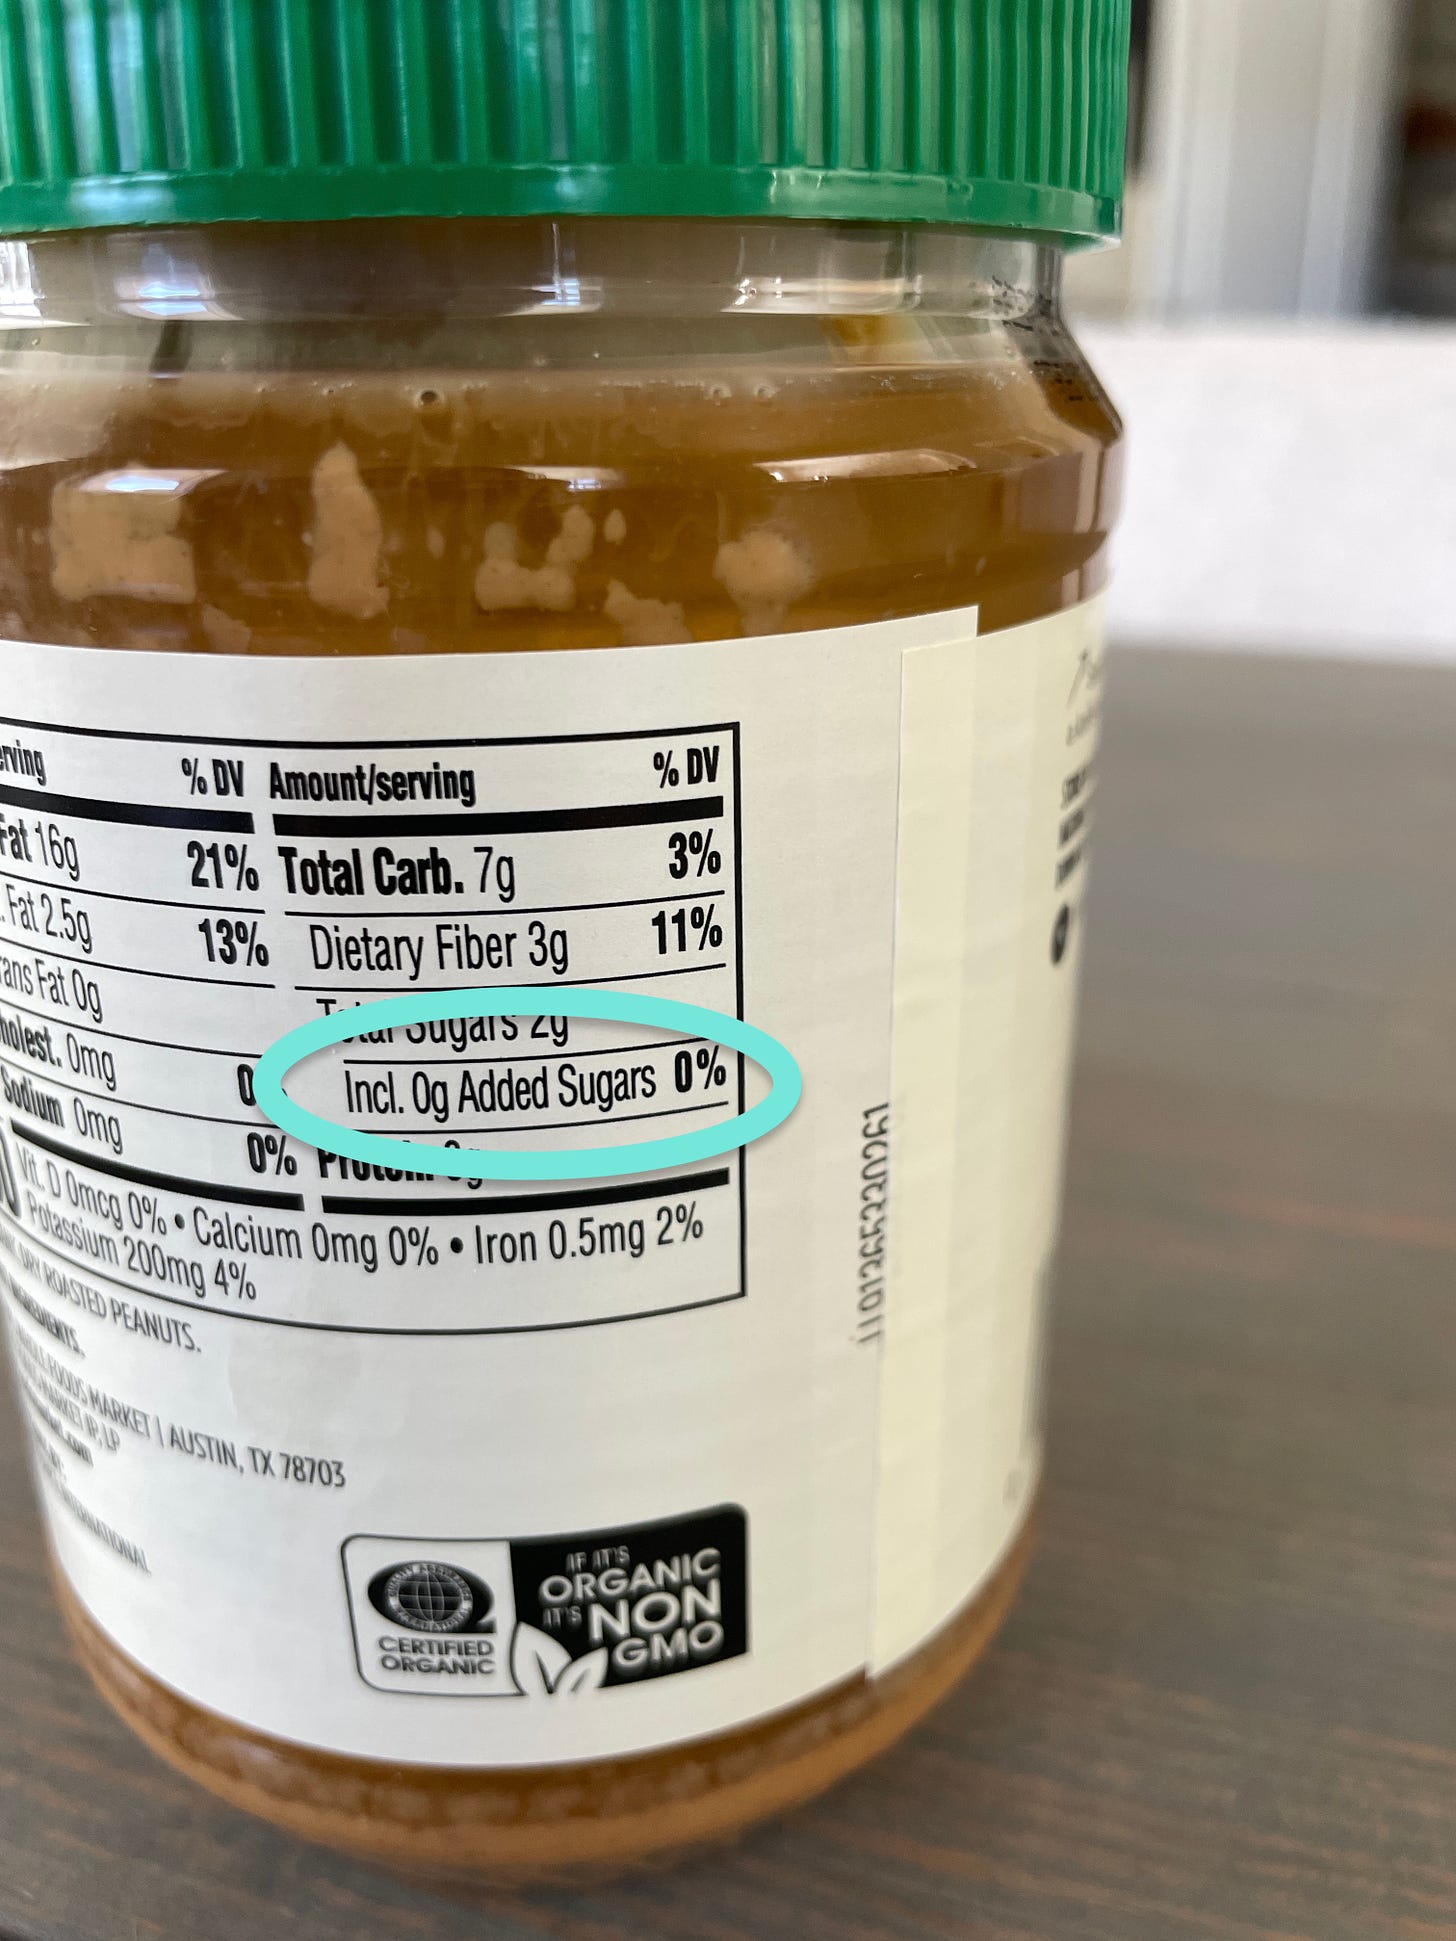 Peanut butter container highlighting added sugar at zero percent daily value